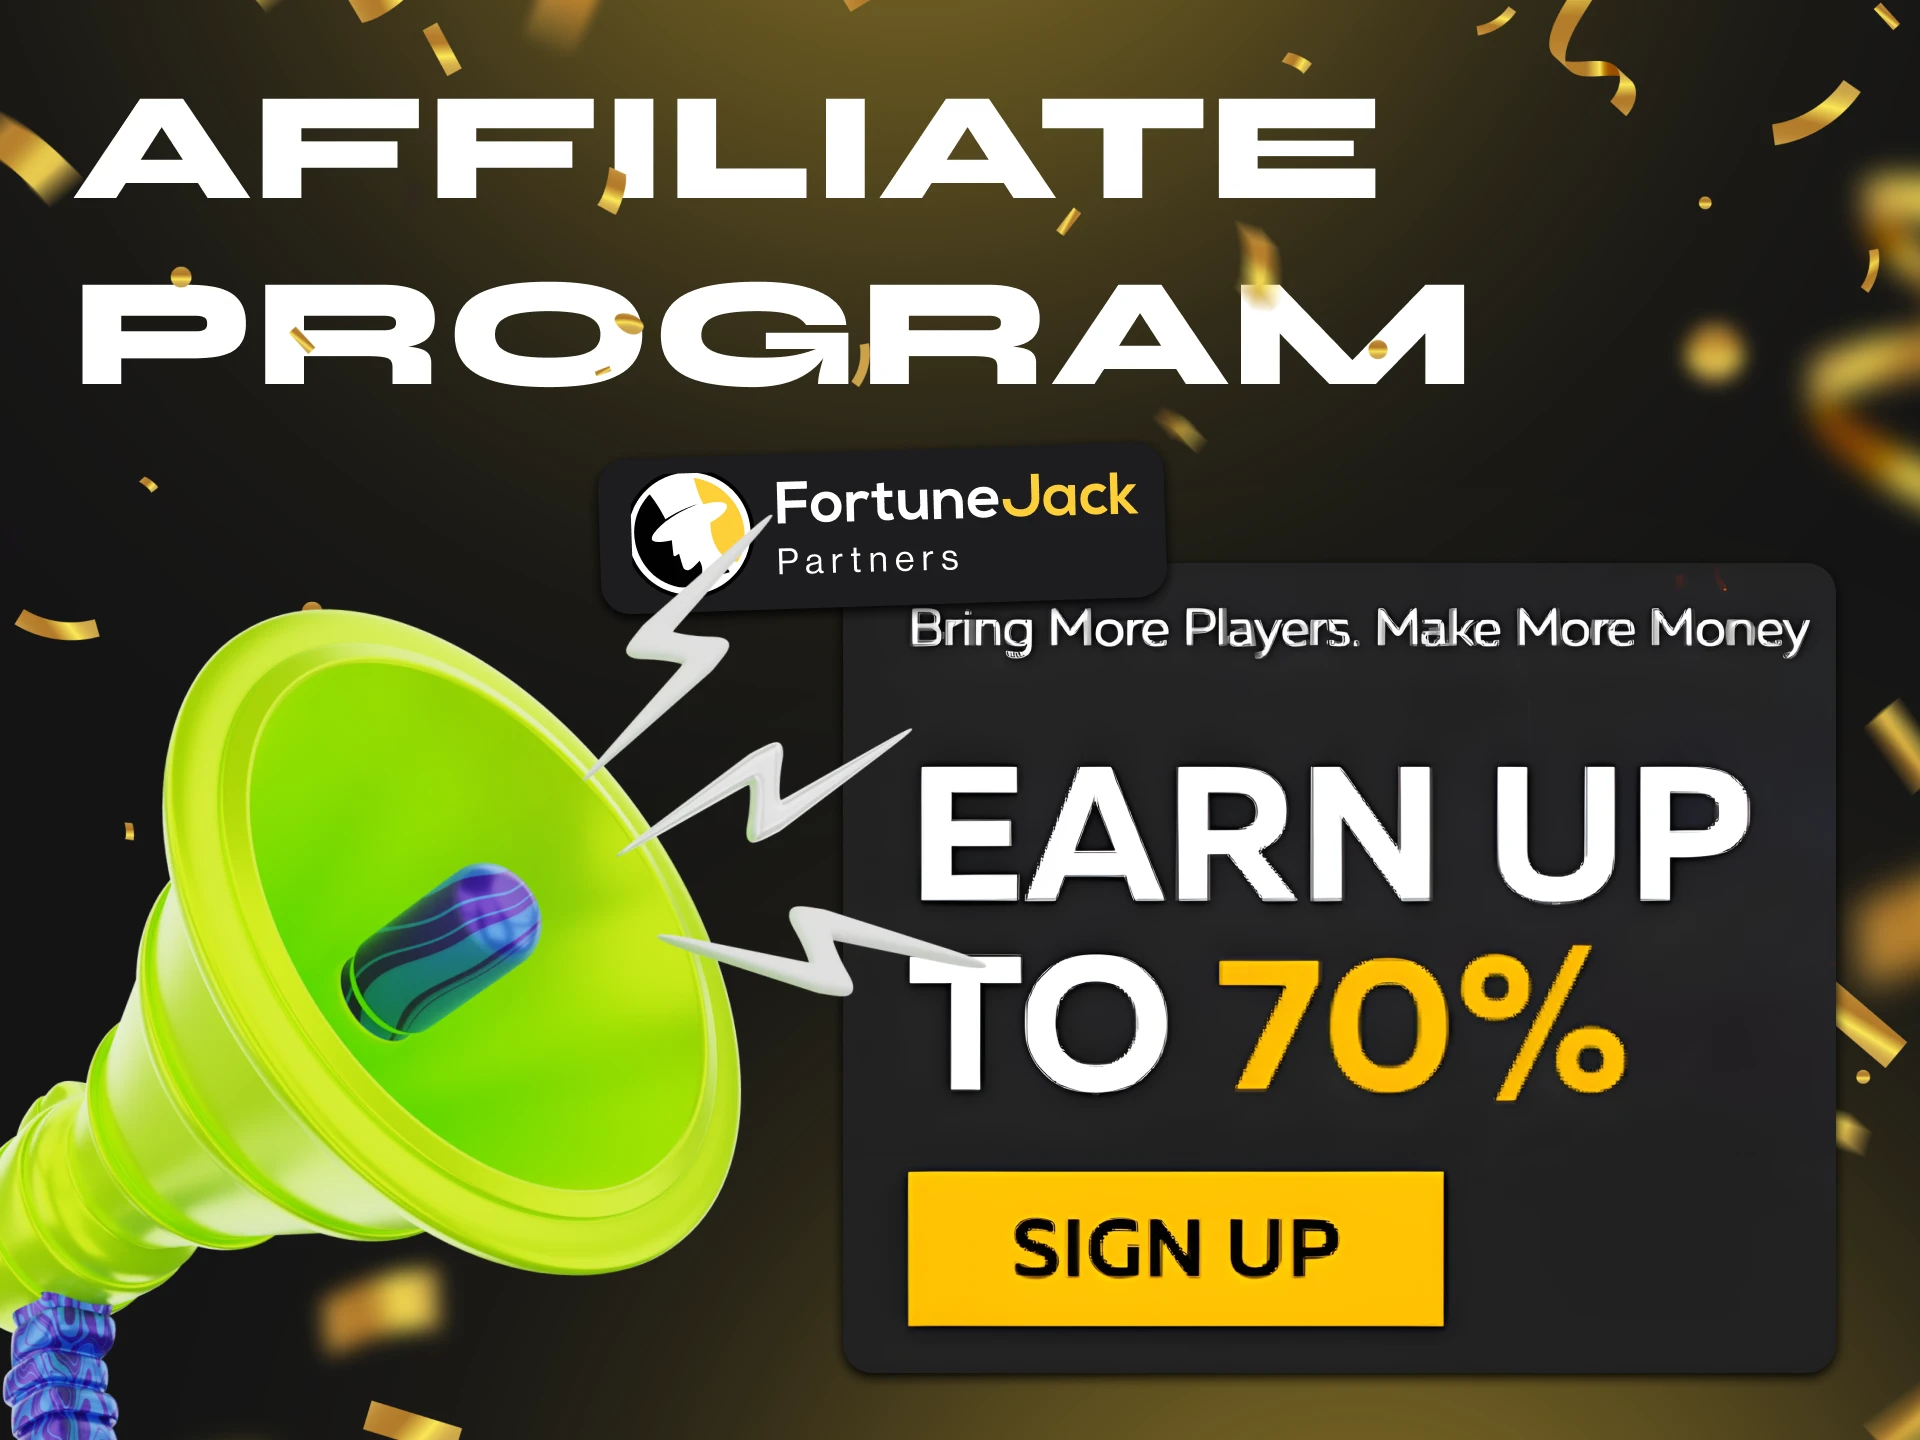 Join FortuneJack Affiliate Program and earn money.